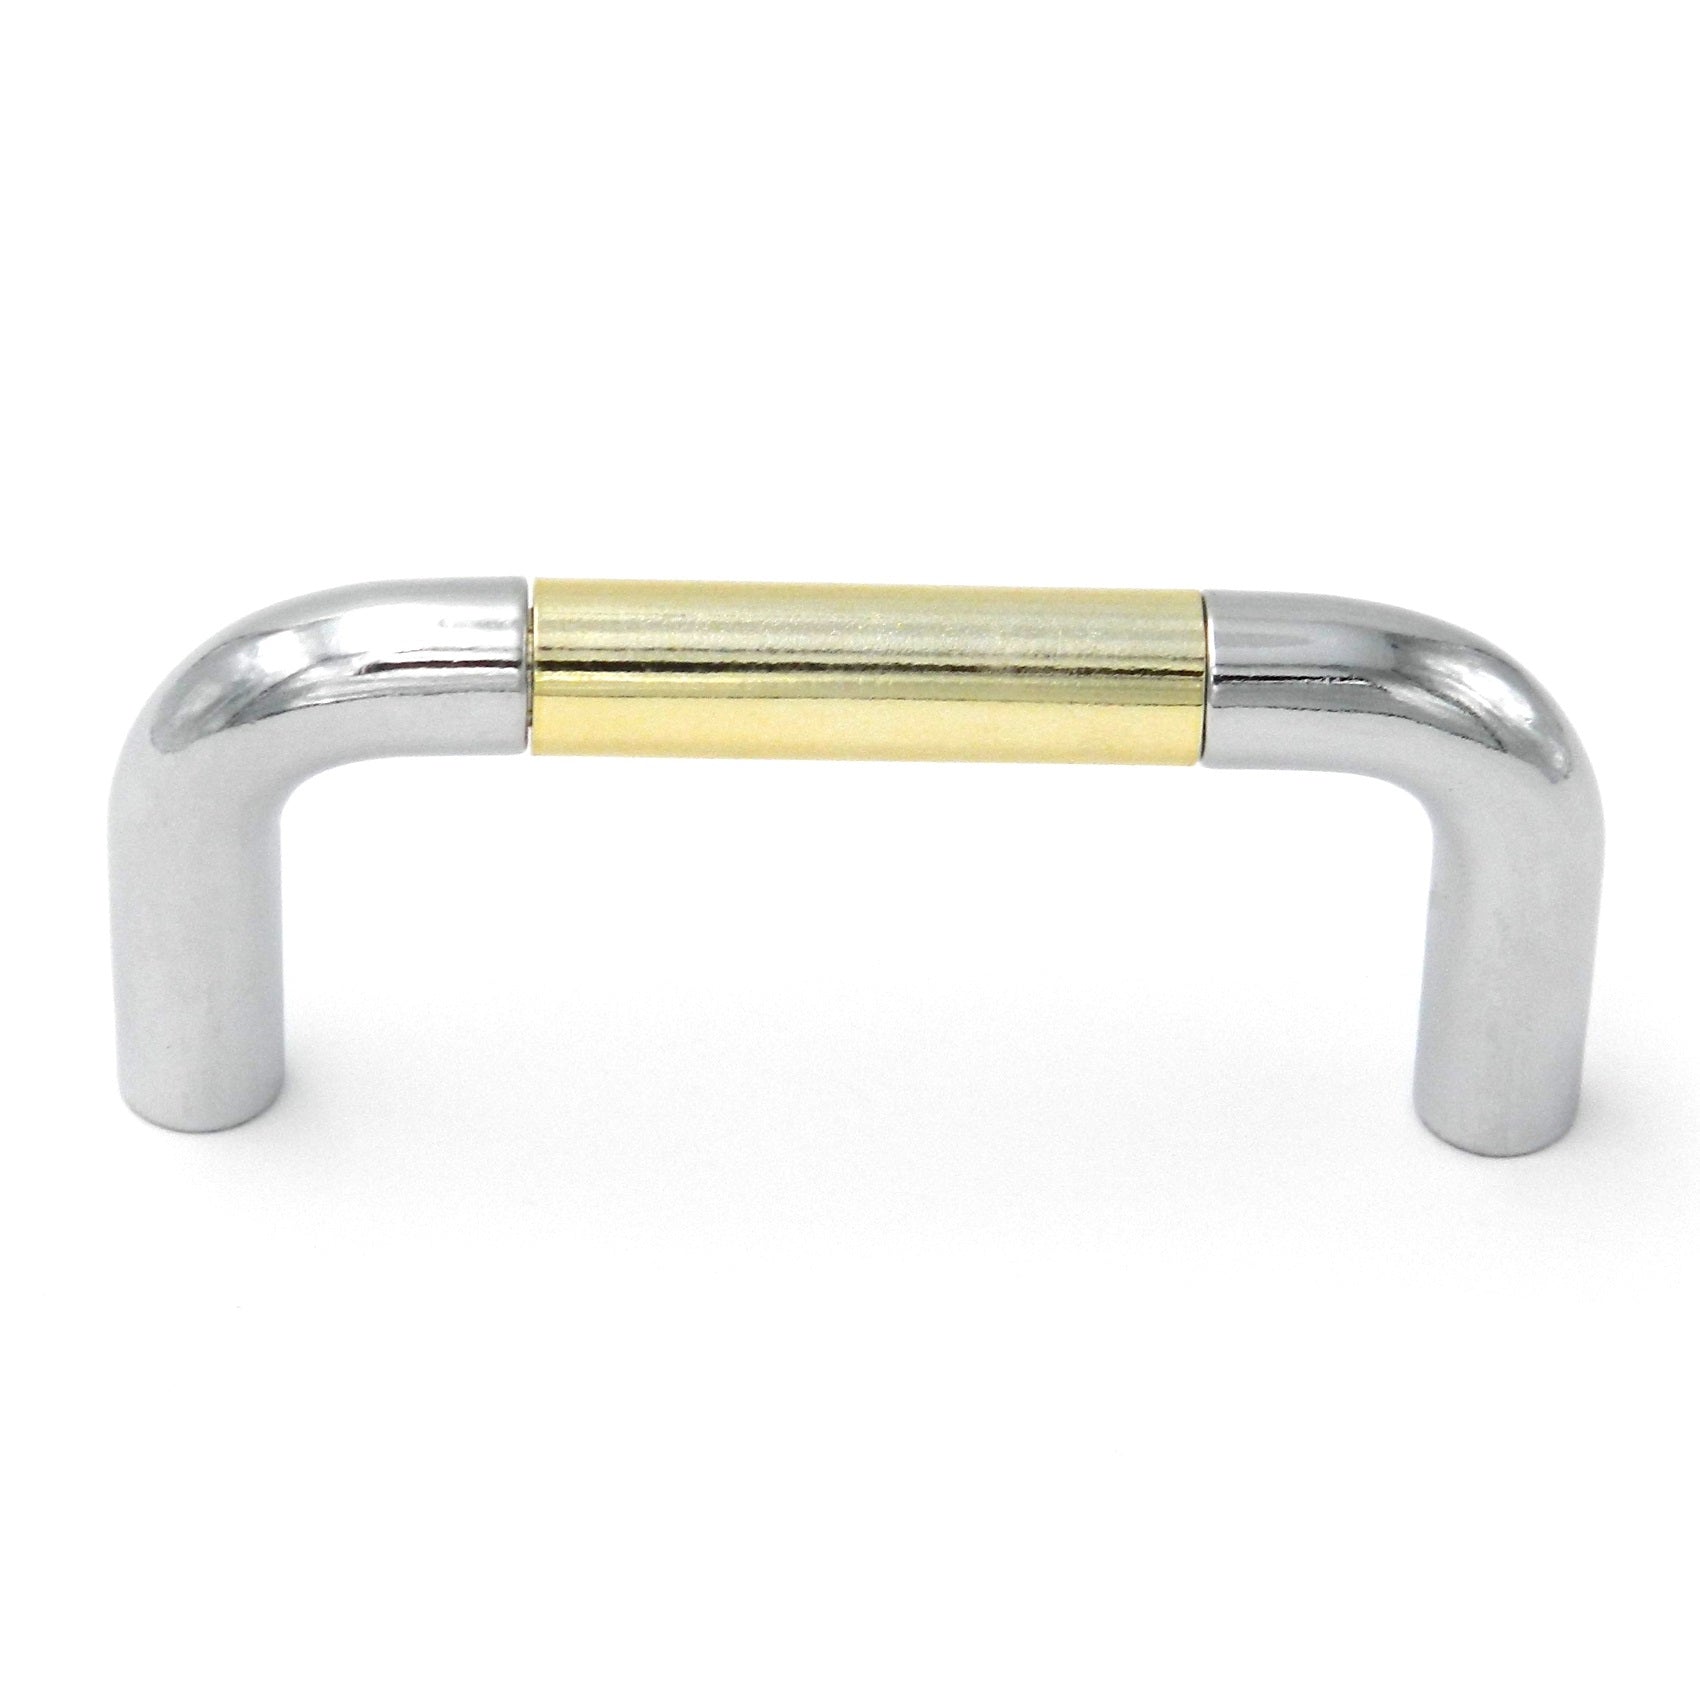 P734-PBCH Chrome Cabinet Handle Pull with Brass, White or Clear Center, 3"cc or 3 3/4" Belwith Hickory